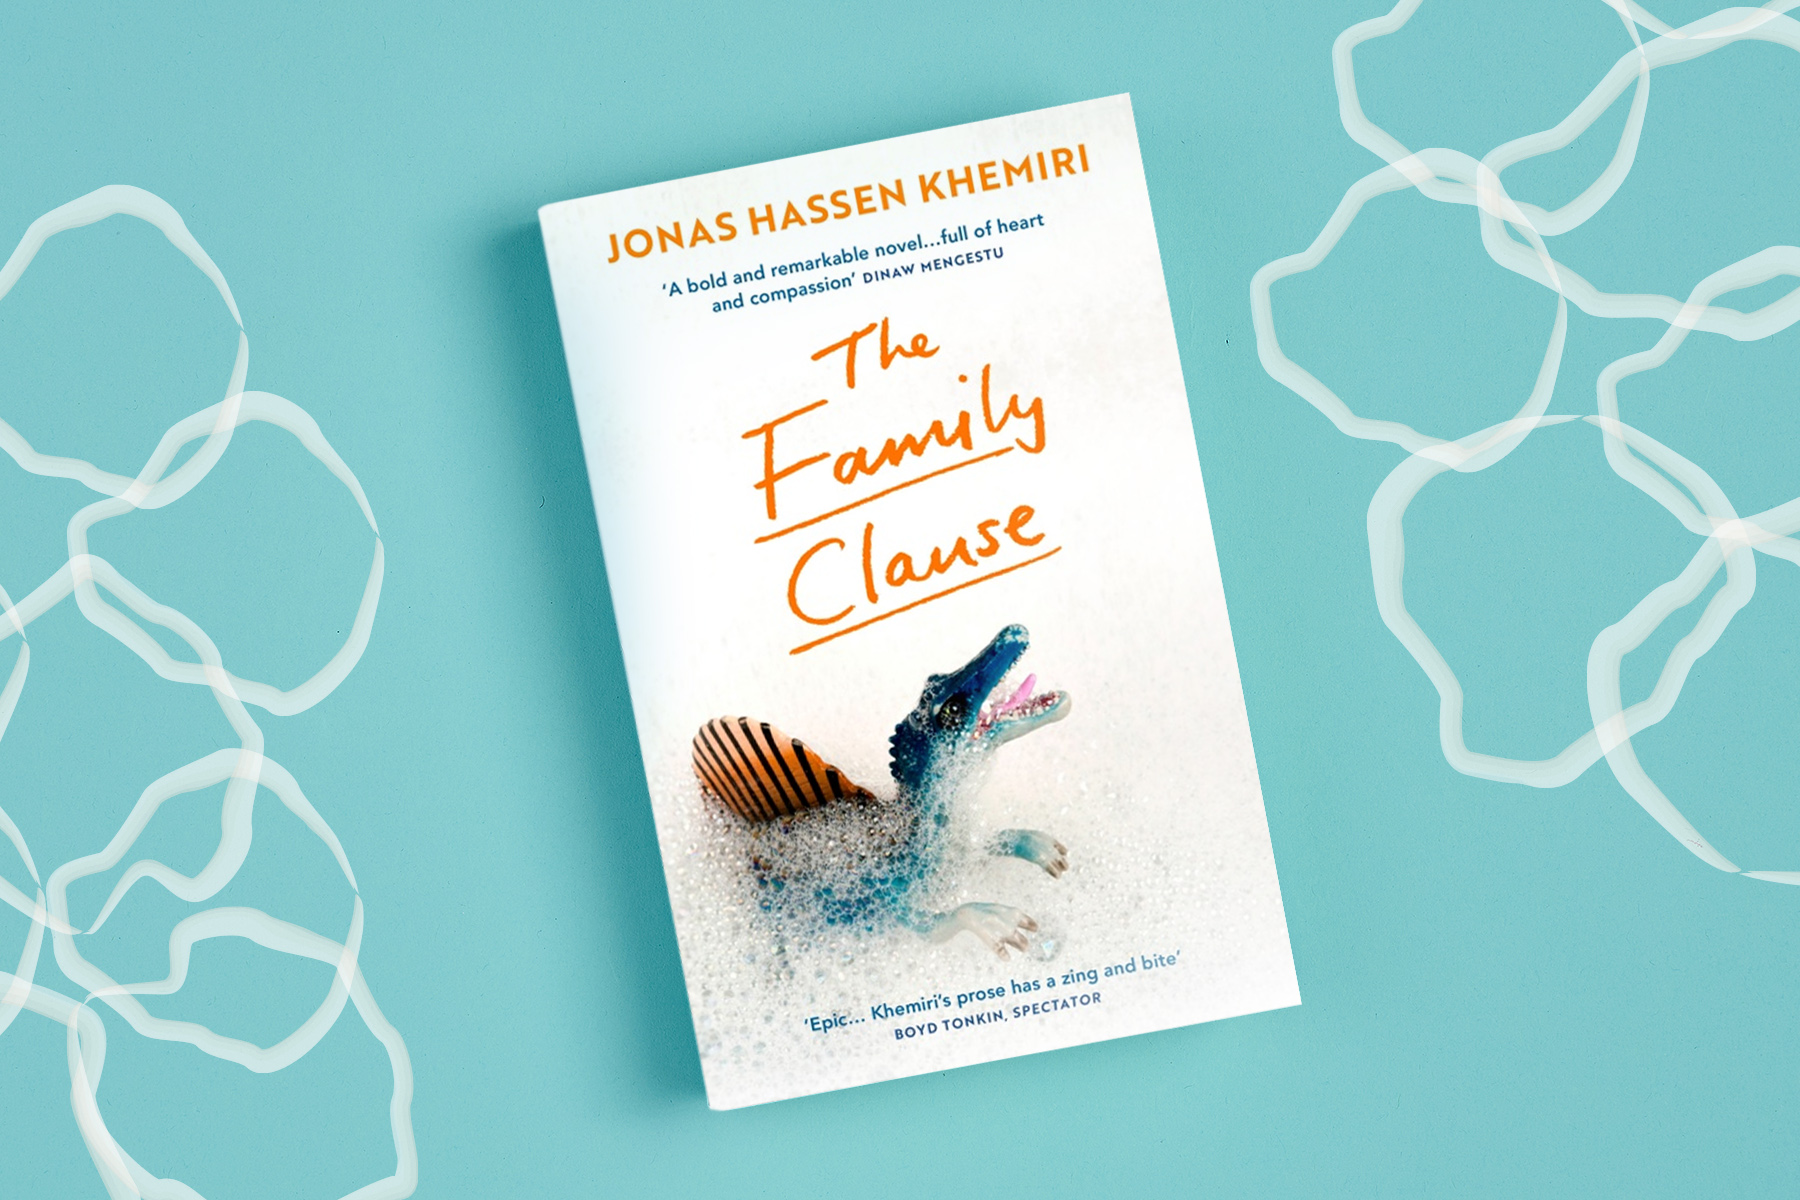 The Family Clause, written by Jonas Hassen Khemiri and translated by Alice Menzies, on a turquoise background.